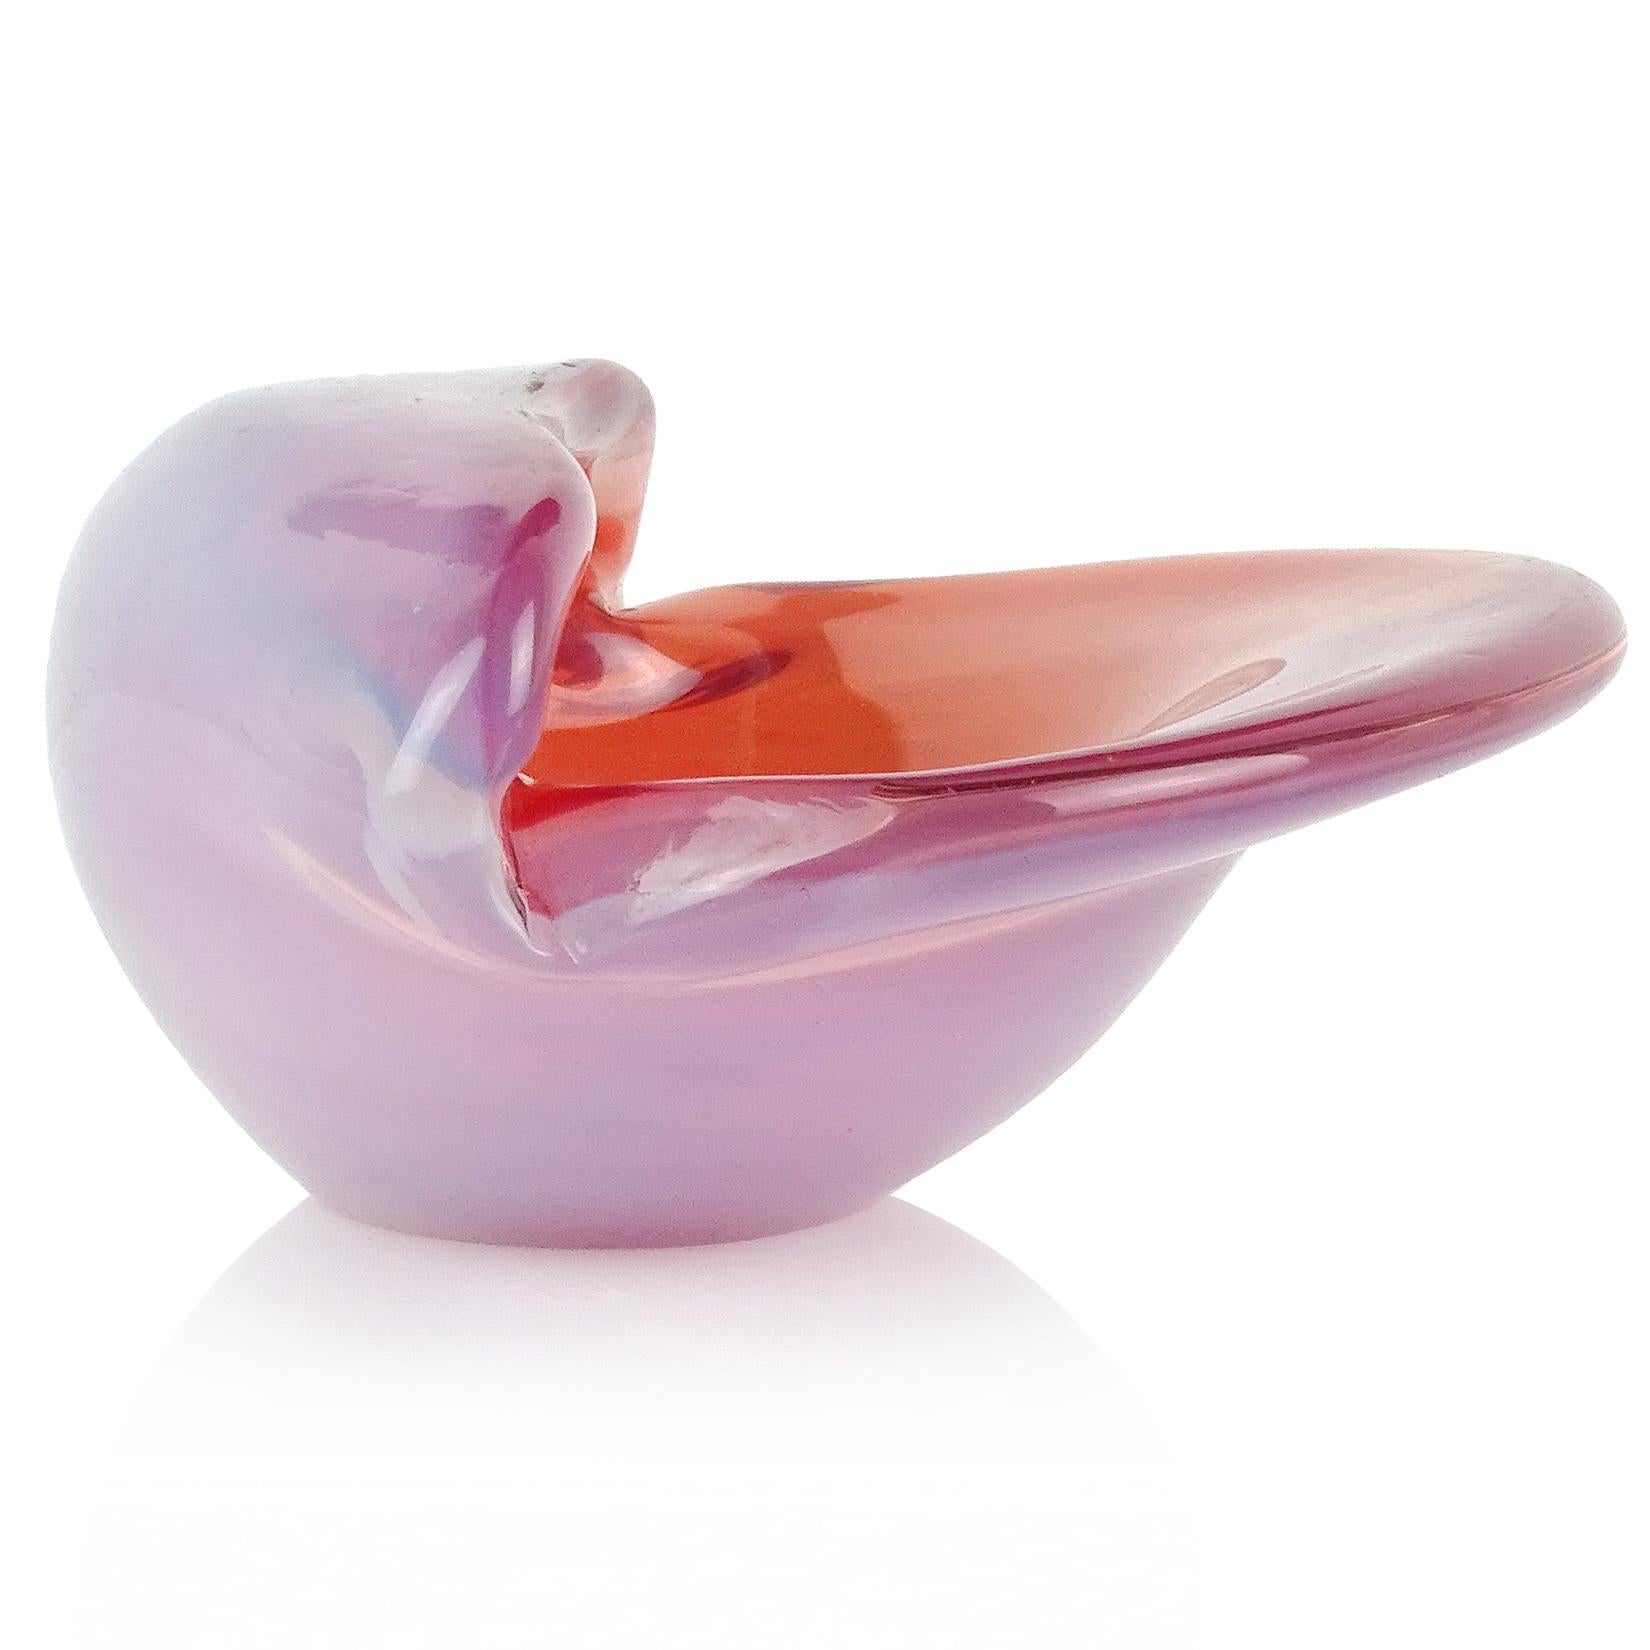 Beautiful Murano hand blown opalescent white and pink Italian art glass clam shell decorative bowl. Documented to the Cenedese Company. Would make a great jewelry, trinket or business card holder. Measures: 6 1/2